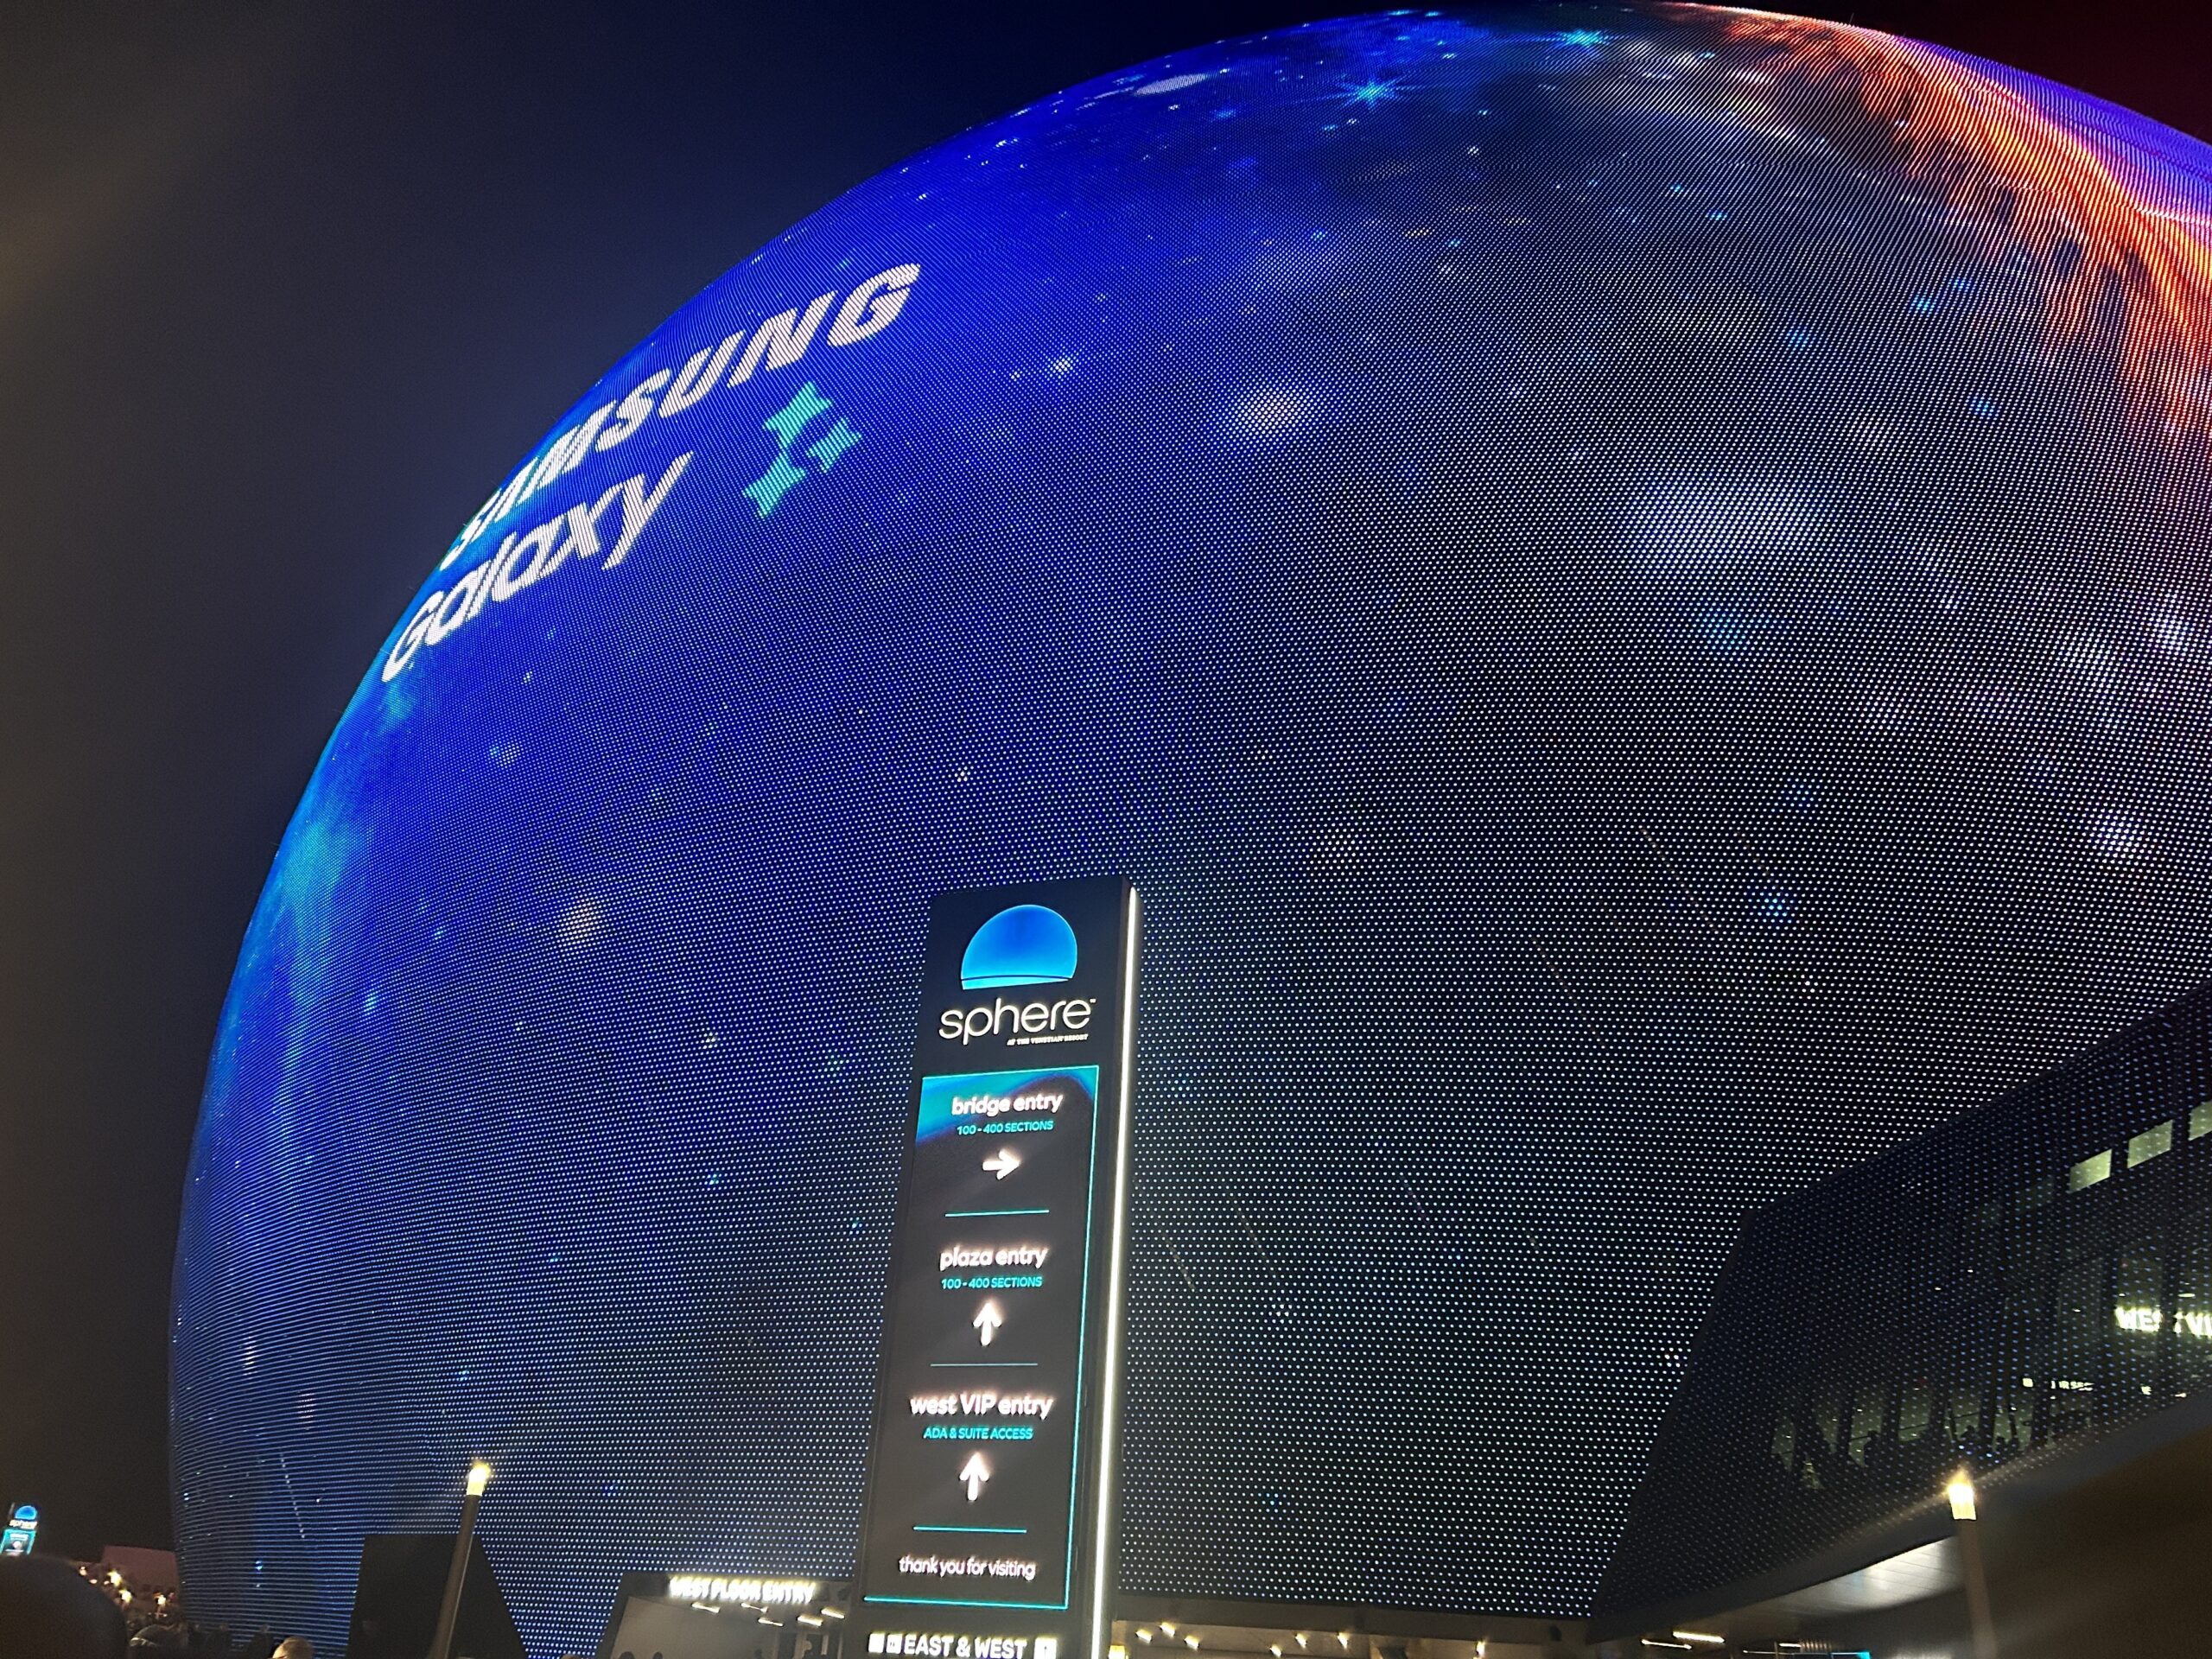 Picture of the Sphere from the outside